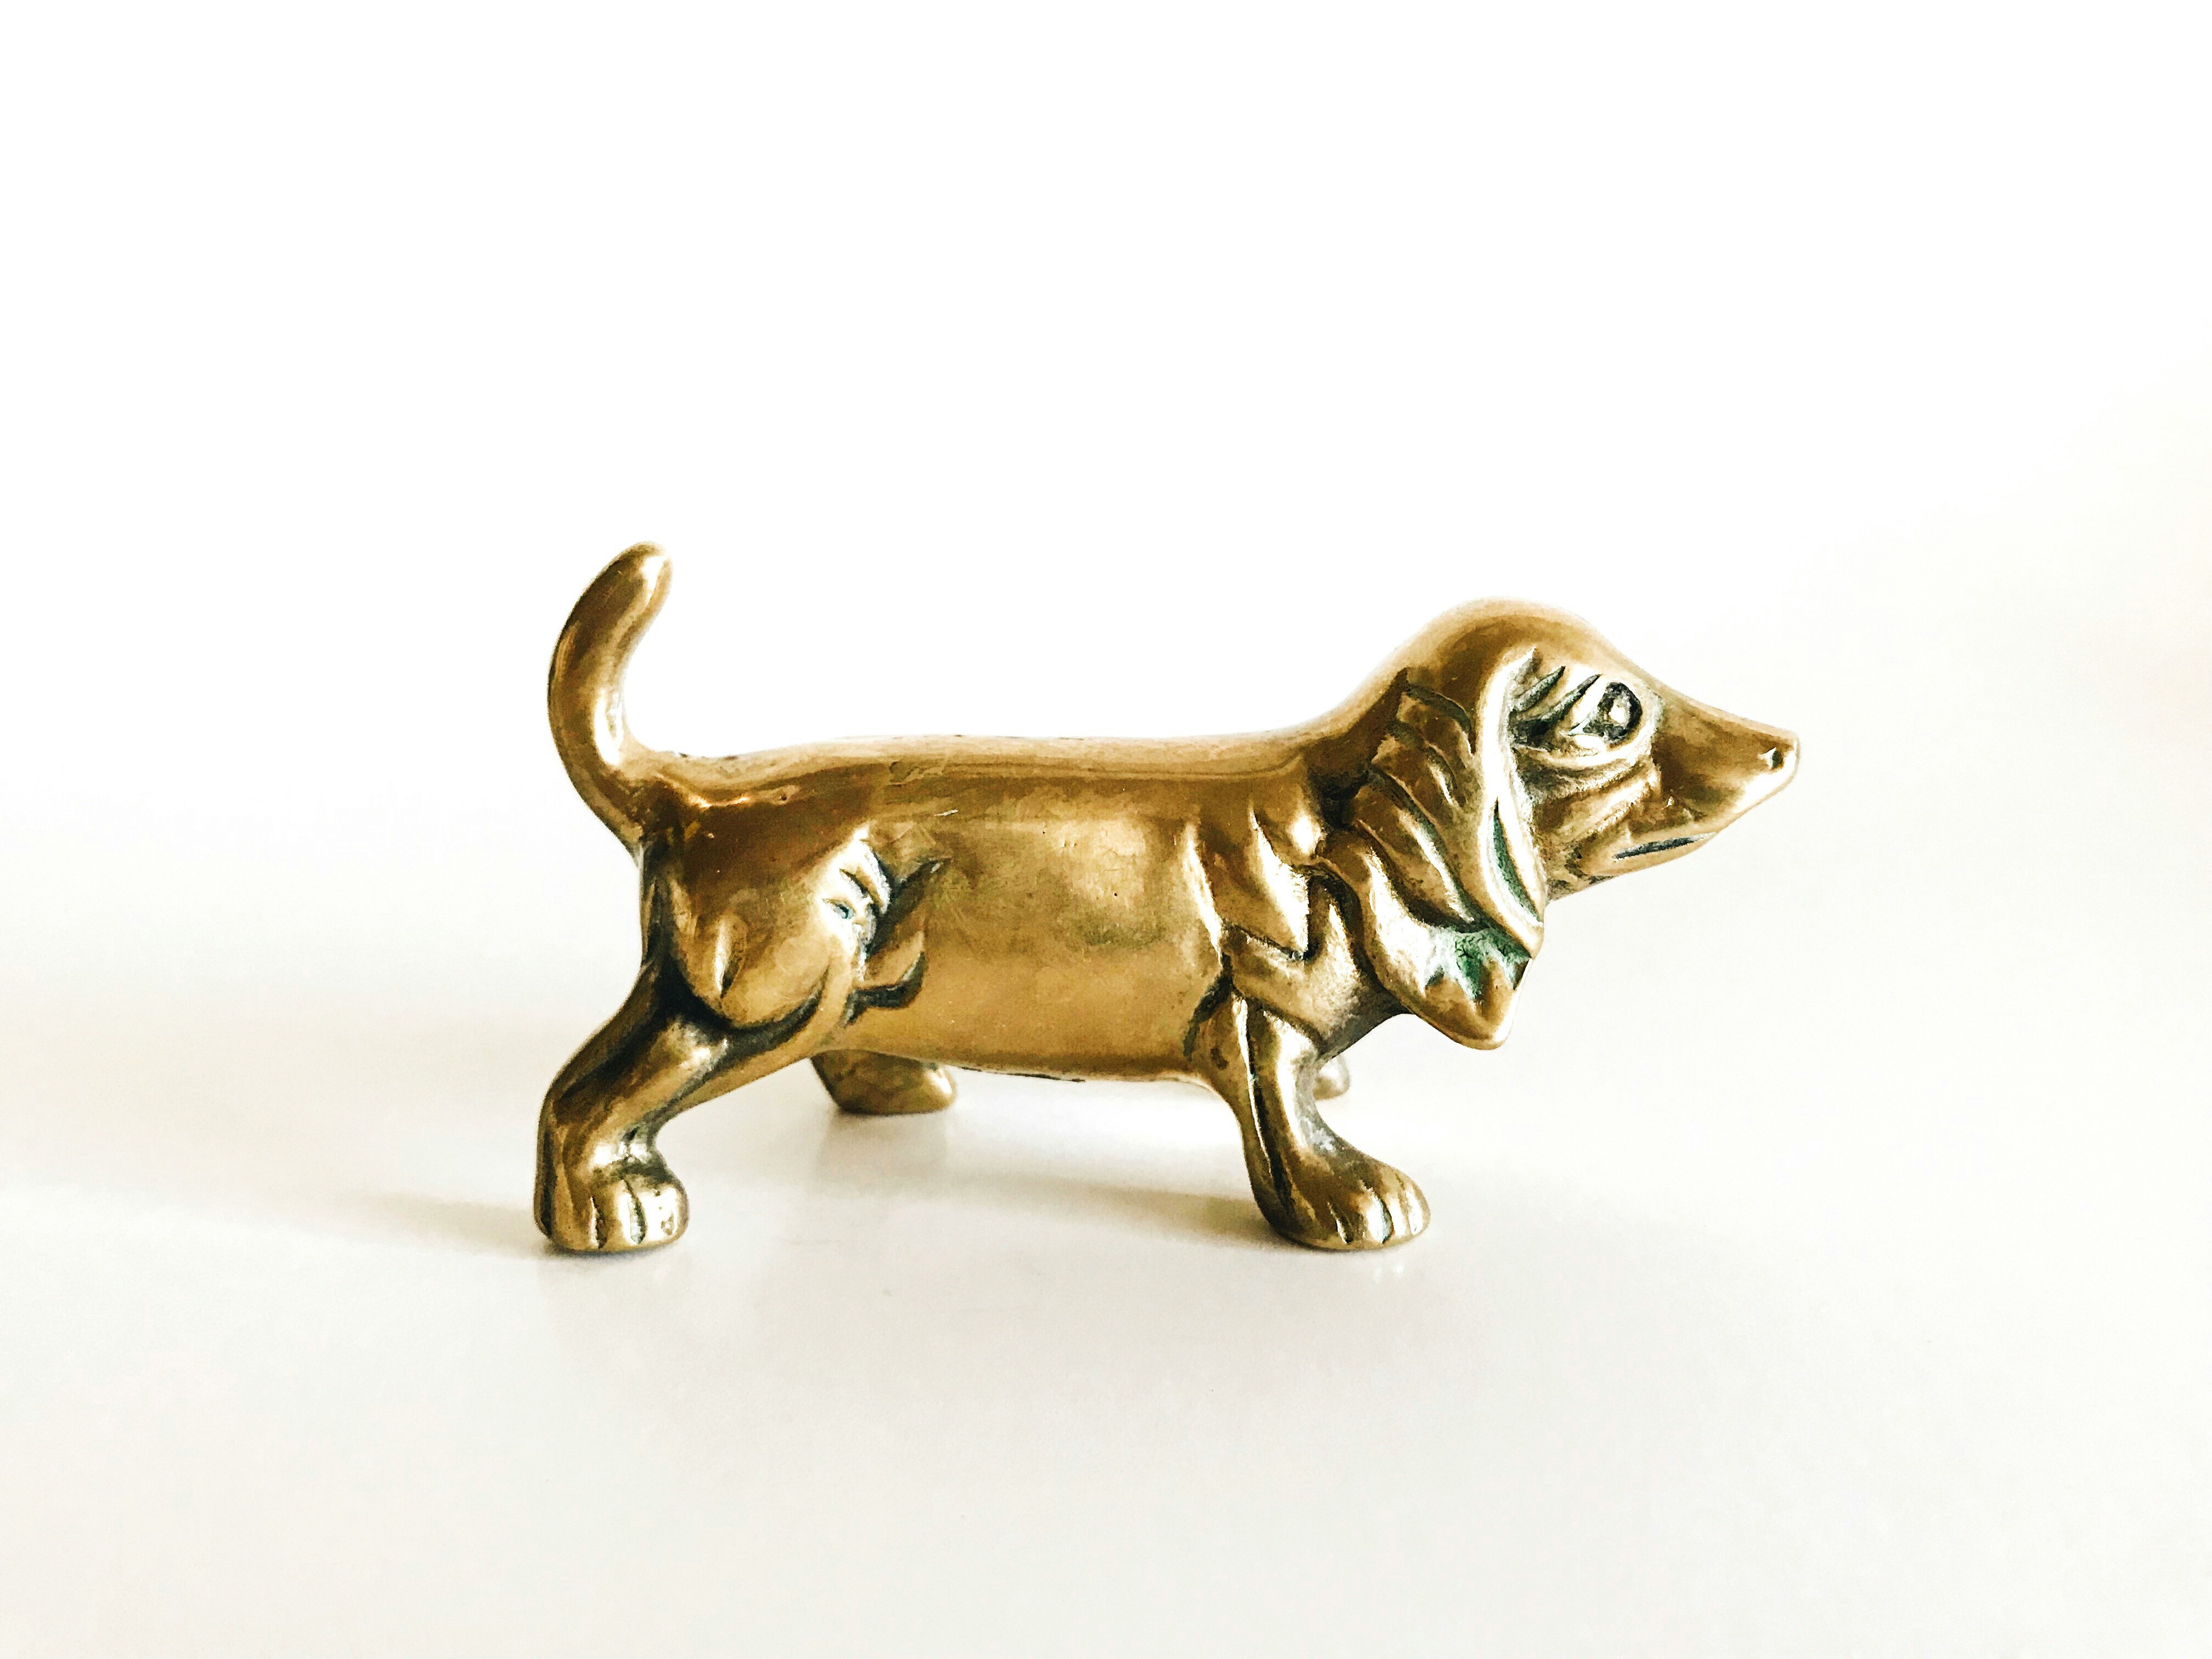 brown wooden dog figurine on white surface